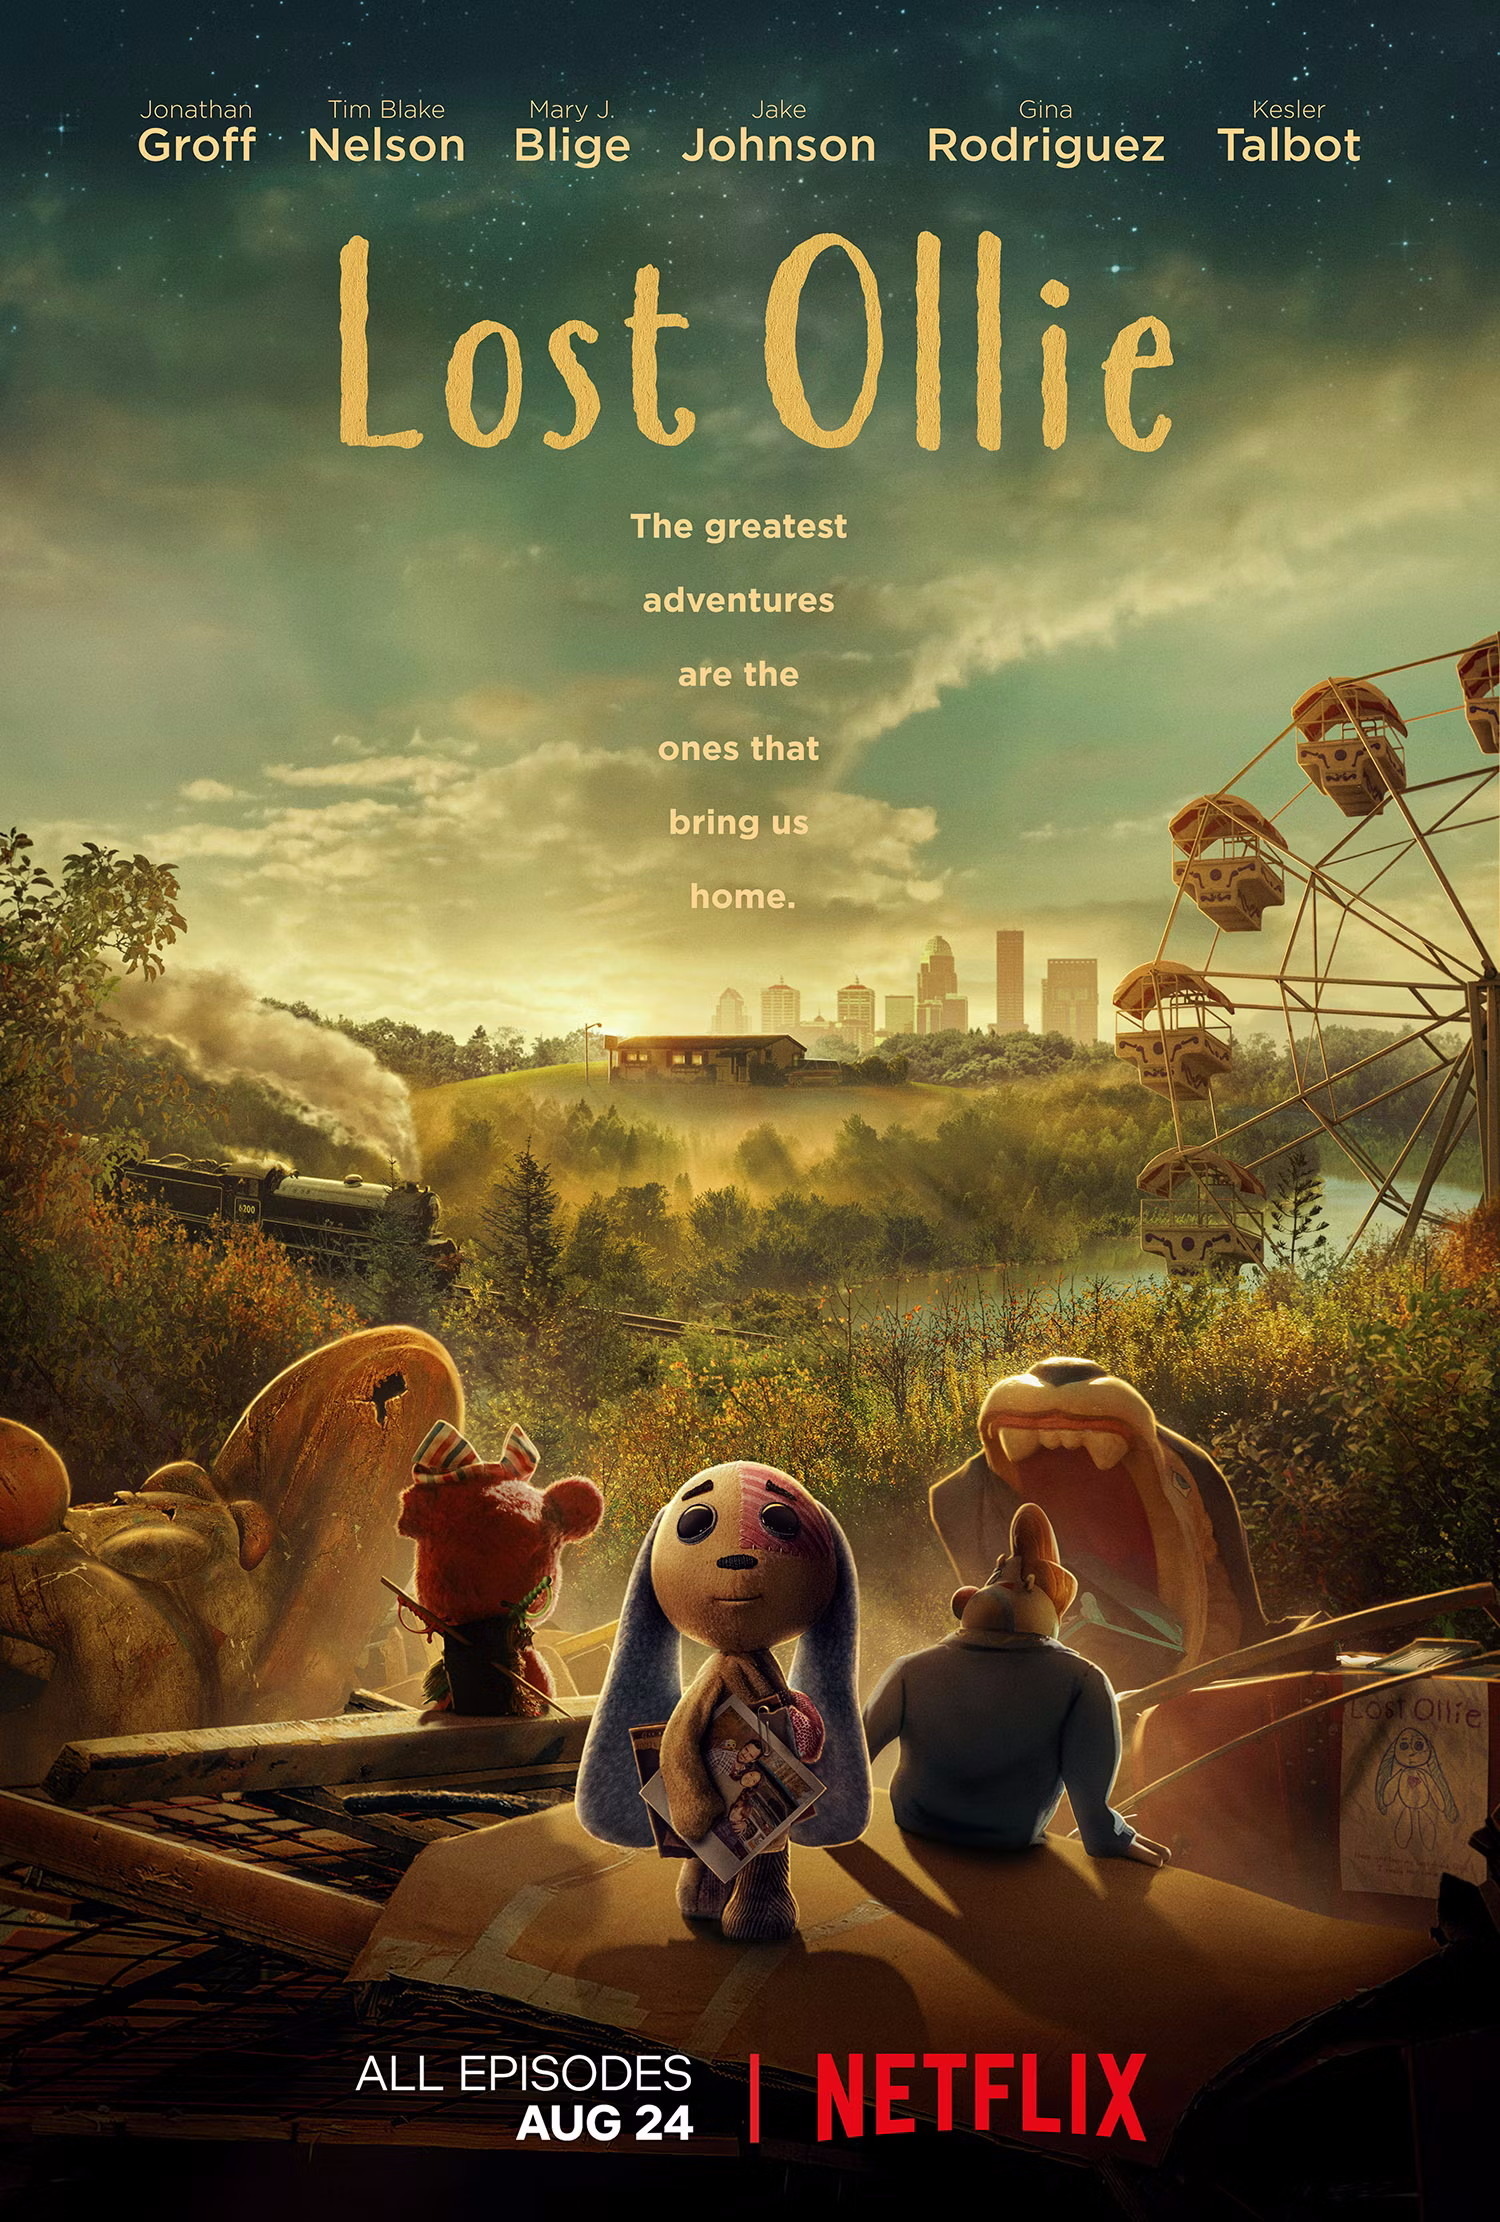 Mega Sized Movie Poster Image for Lost Ollie 